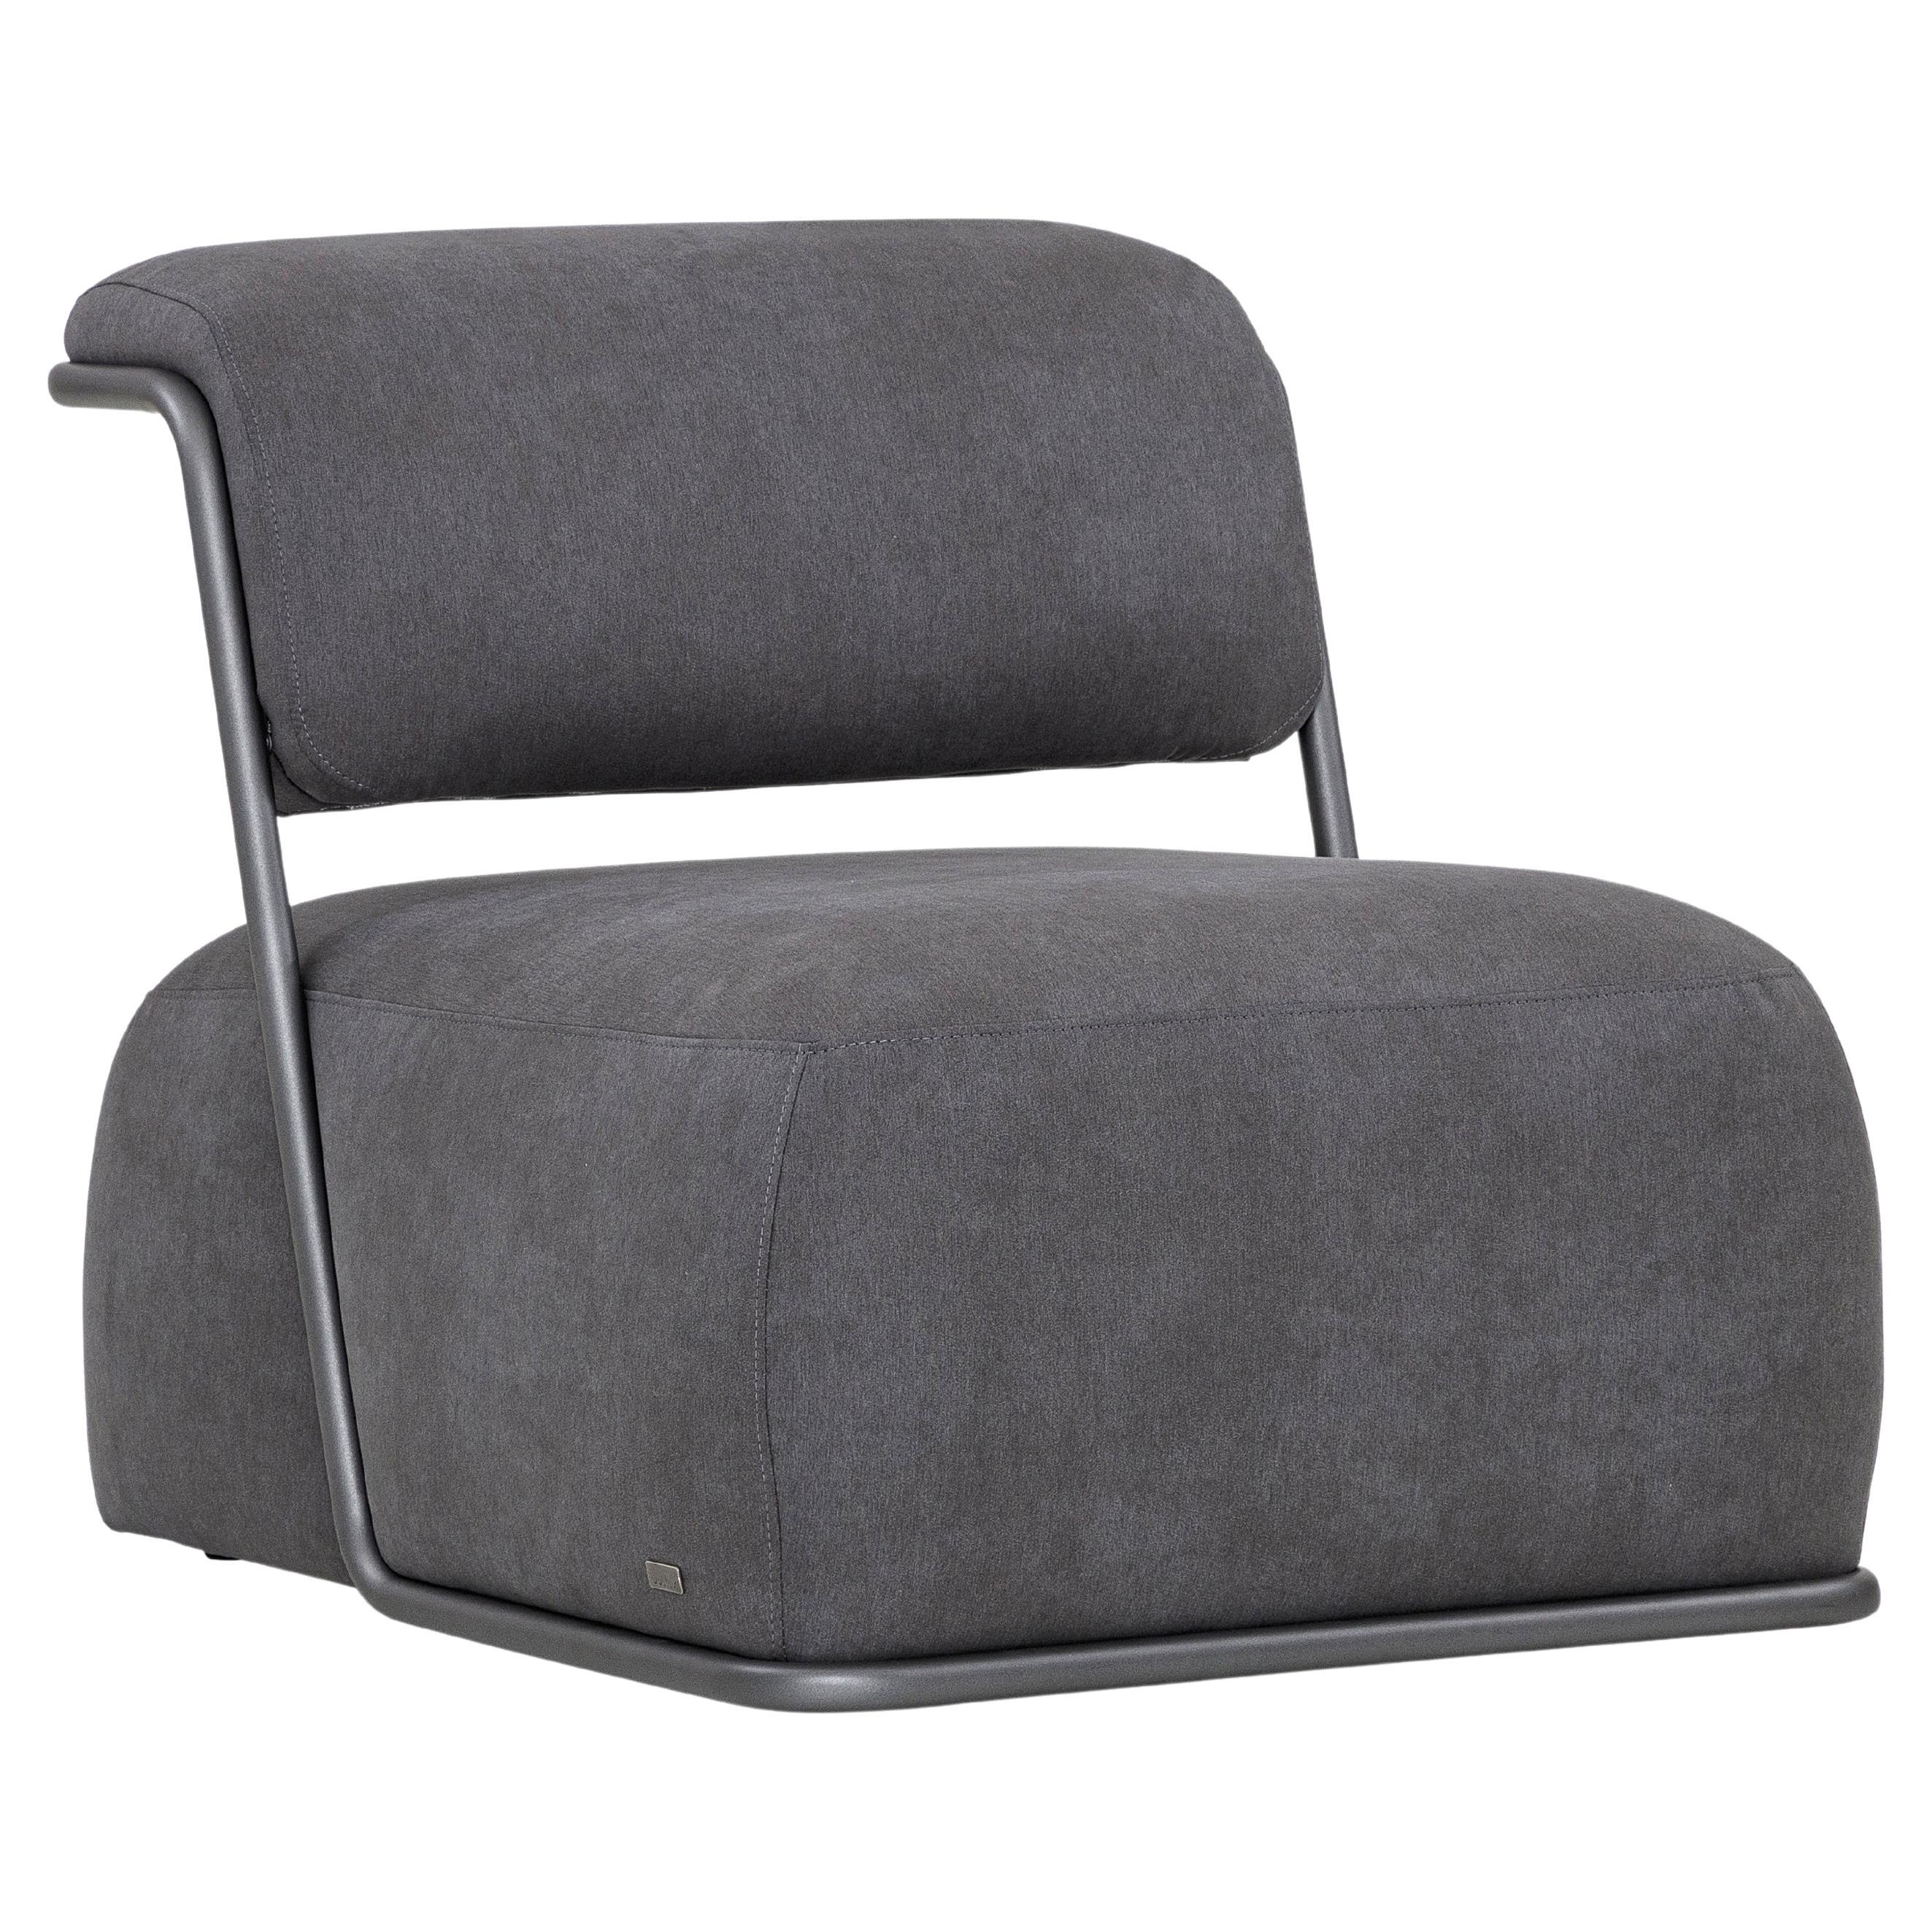 The Mono occasional chair upholstered in this elegant gray fabric and a gray metal frame, has been created by the architectors and designers from the Uultis team. With a lot of thought they put together this amazing monochromatic chair, it is very